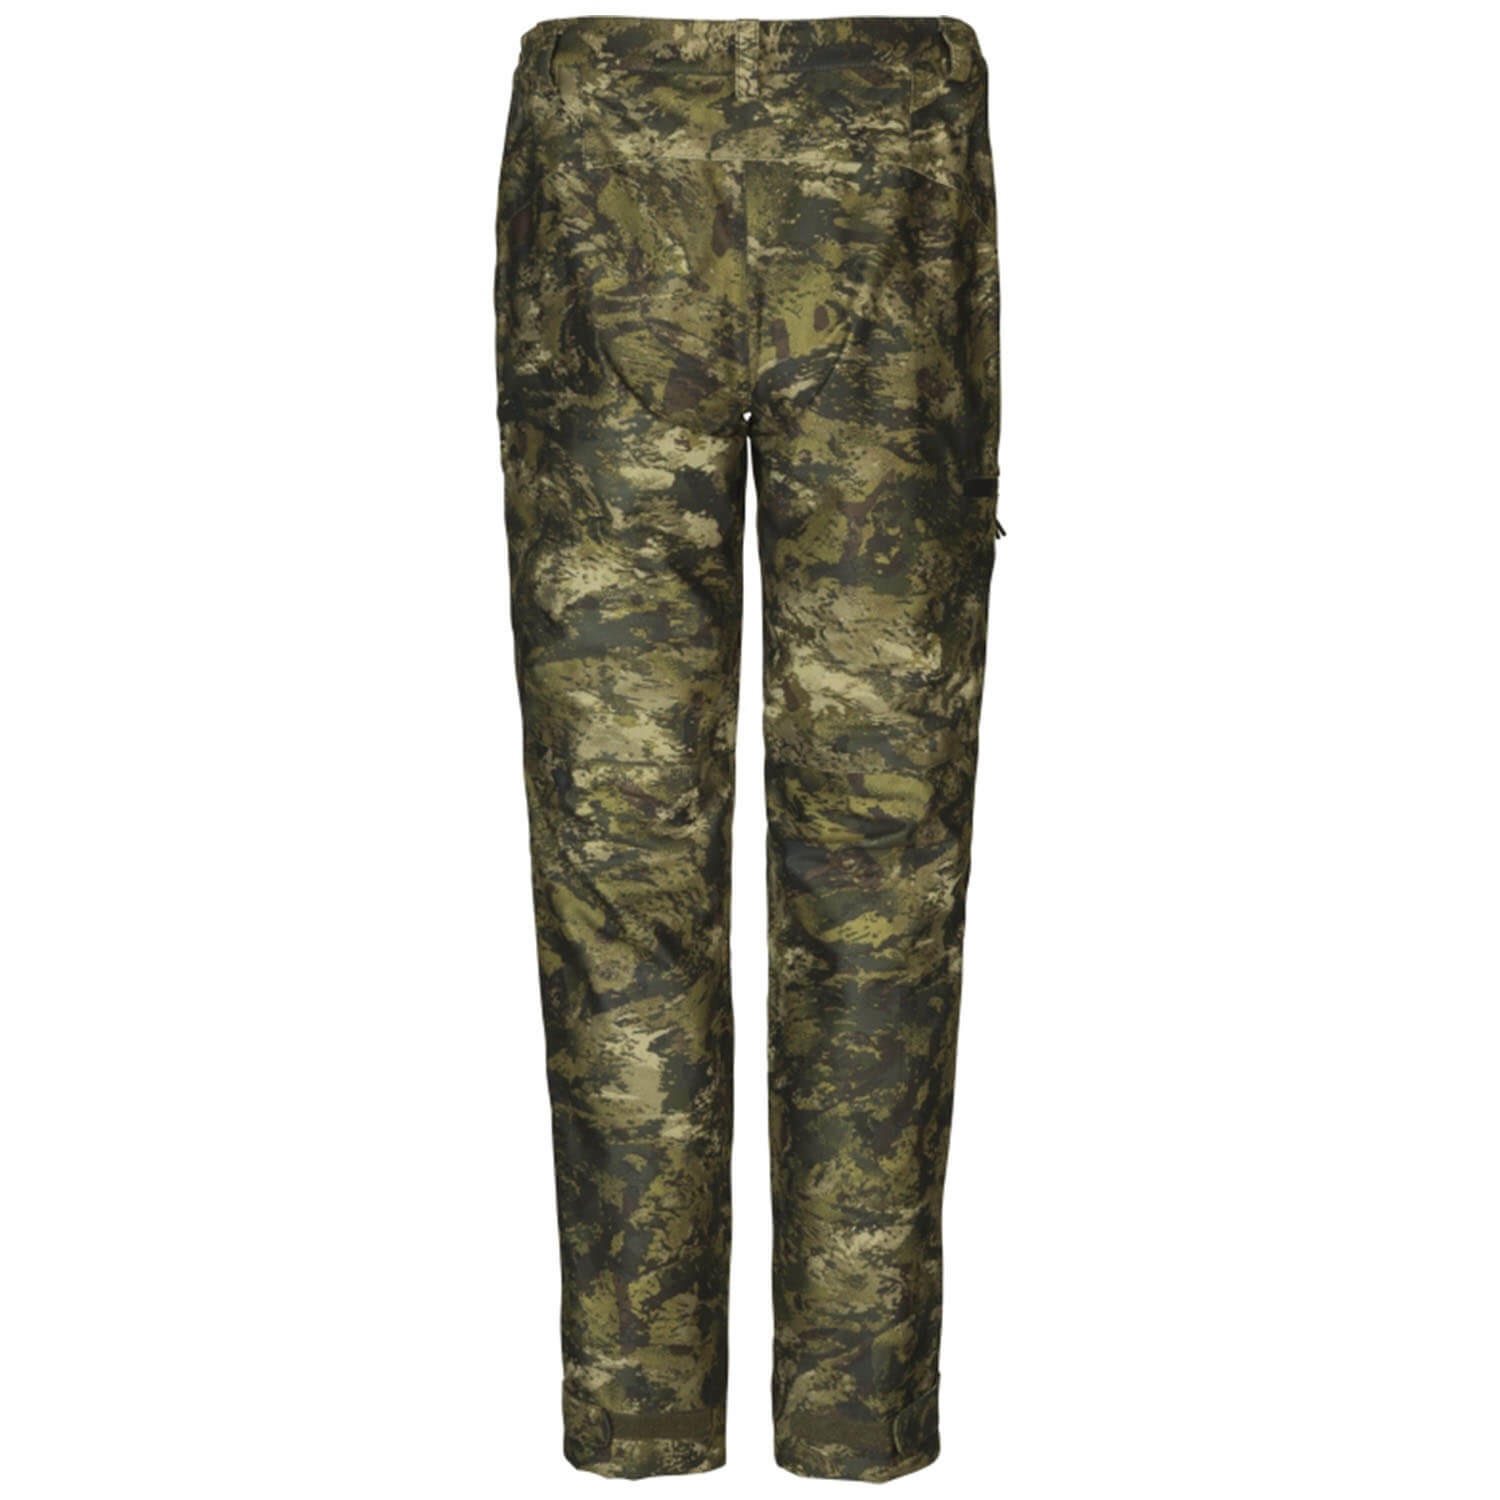 Seeland ladys hunting pants avail (InVis)